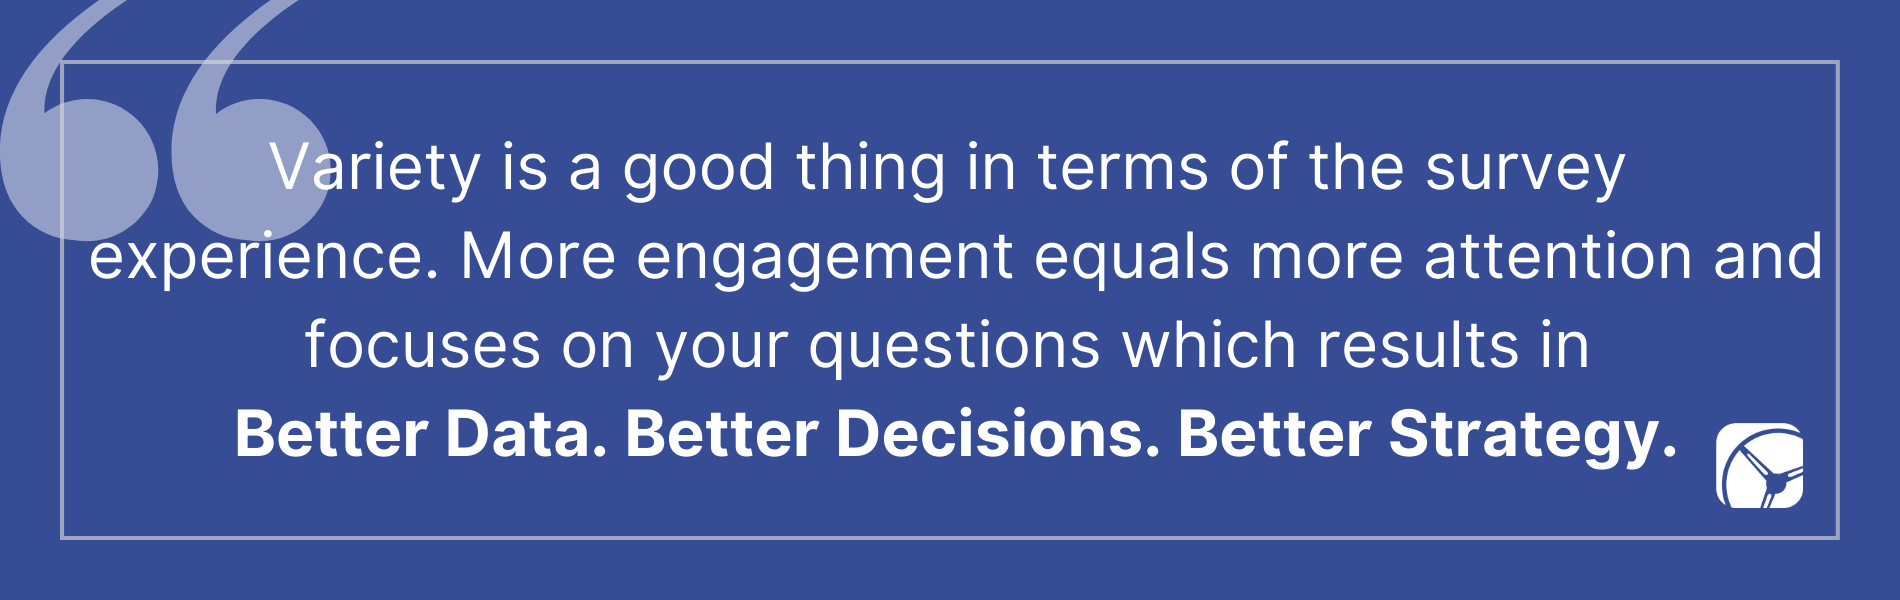 Variety is a good thing in terms of the survey  experience. More engagement equals more attention and focuses on your questions which results in  Better Data. Better Decisions. Better Strategy.